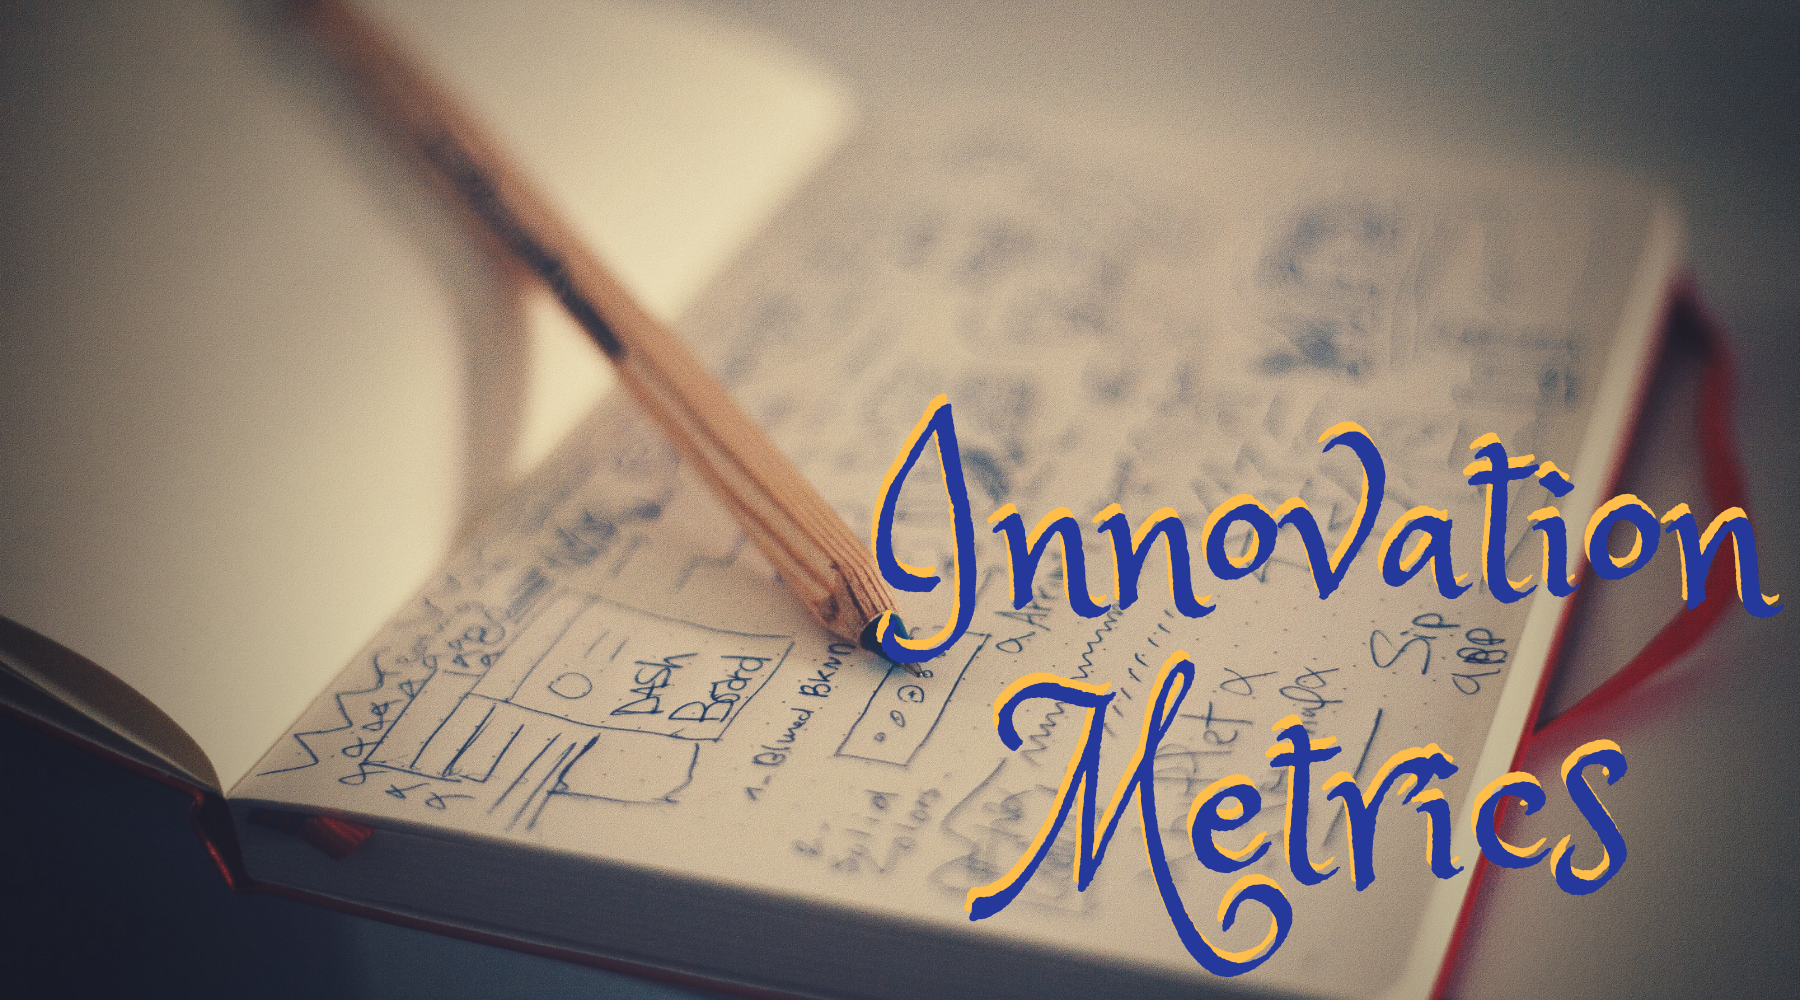 A Comprehensive Guide to Innovation Metrics: Definition, Uses, and Advantages